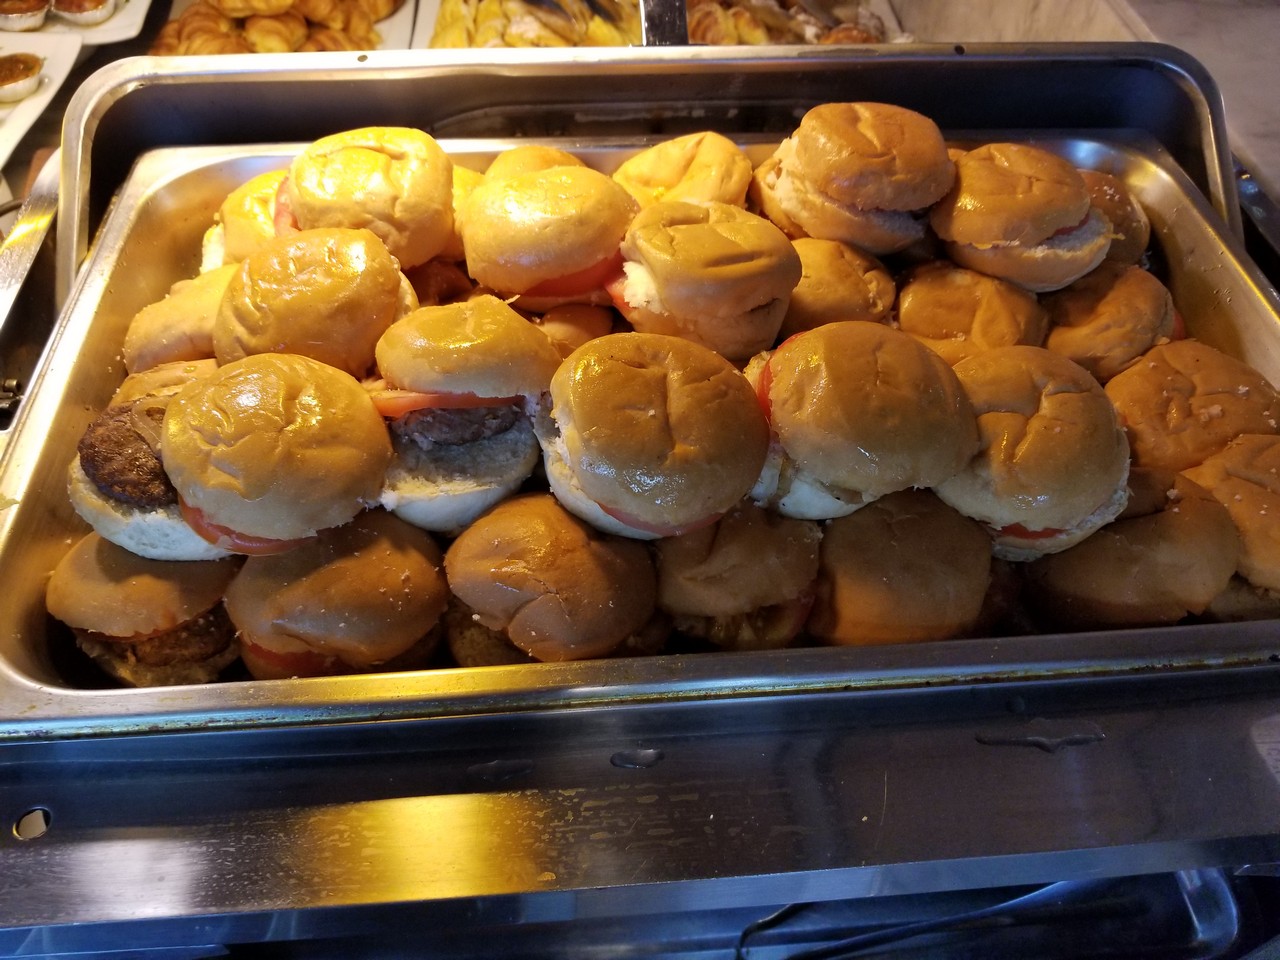 a tray of sandwiches